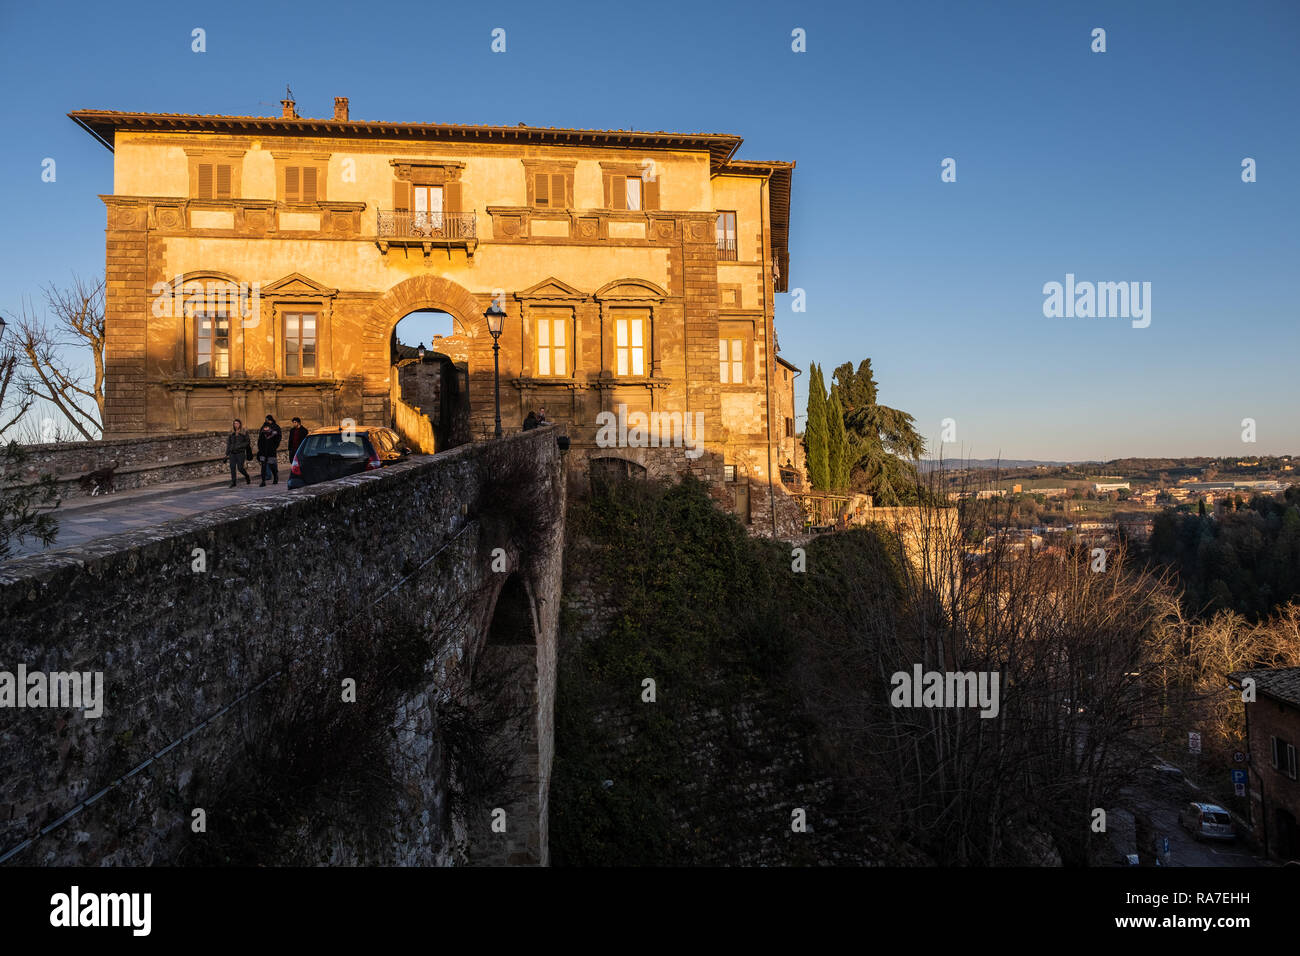 COLLE VAL D’ELSA, ITALY - DECEMBER 26, 2018: Unknown people and Palazzo Campana, the gateway to the oldest part of the town of Colle Val d'Elsa, Siena Stock Photo